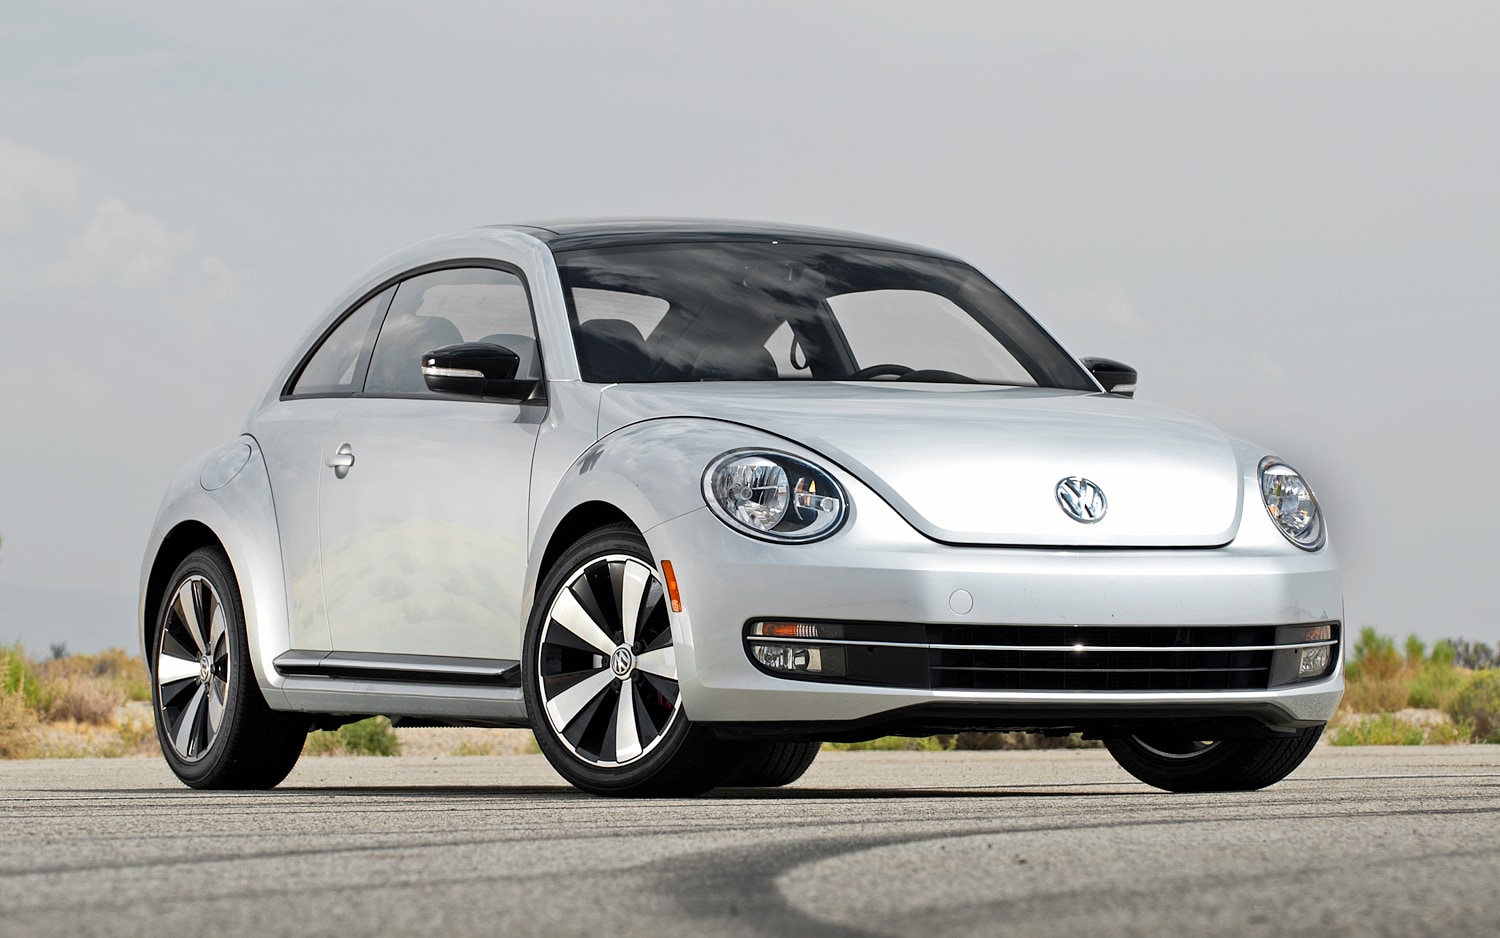 First Test: 2012 Volkswagen Beetle and Beetle Turbo